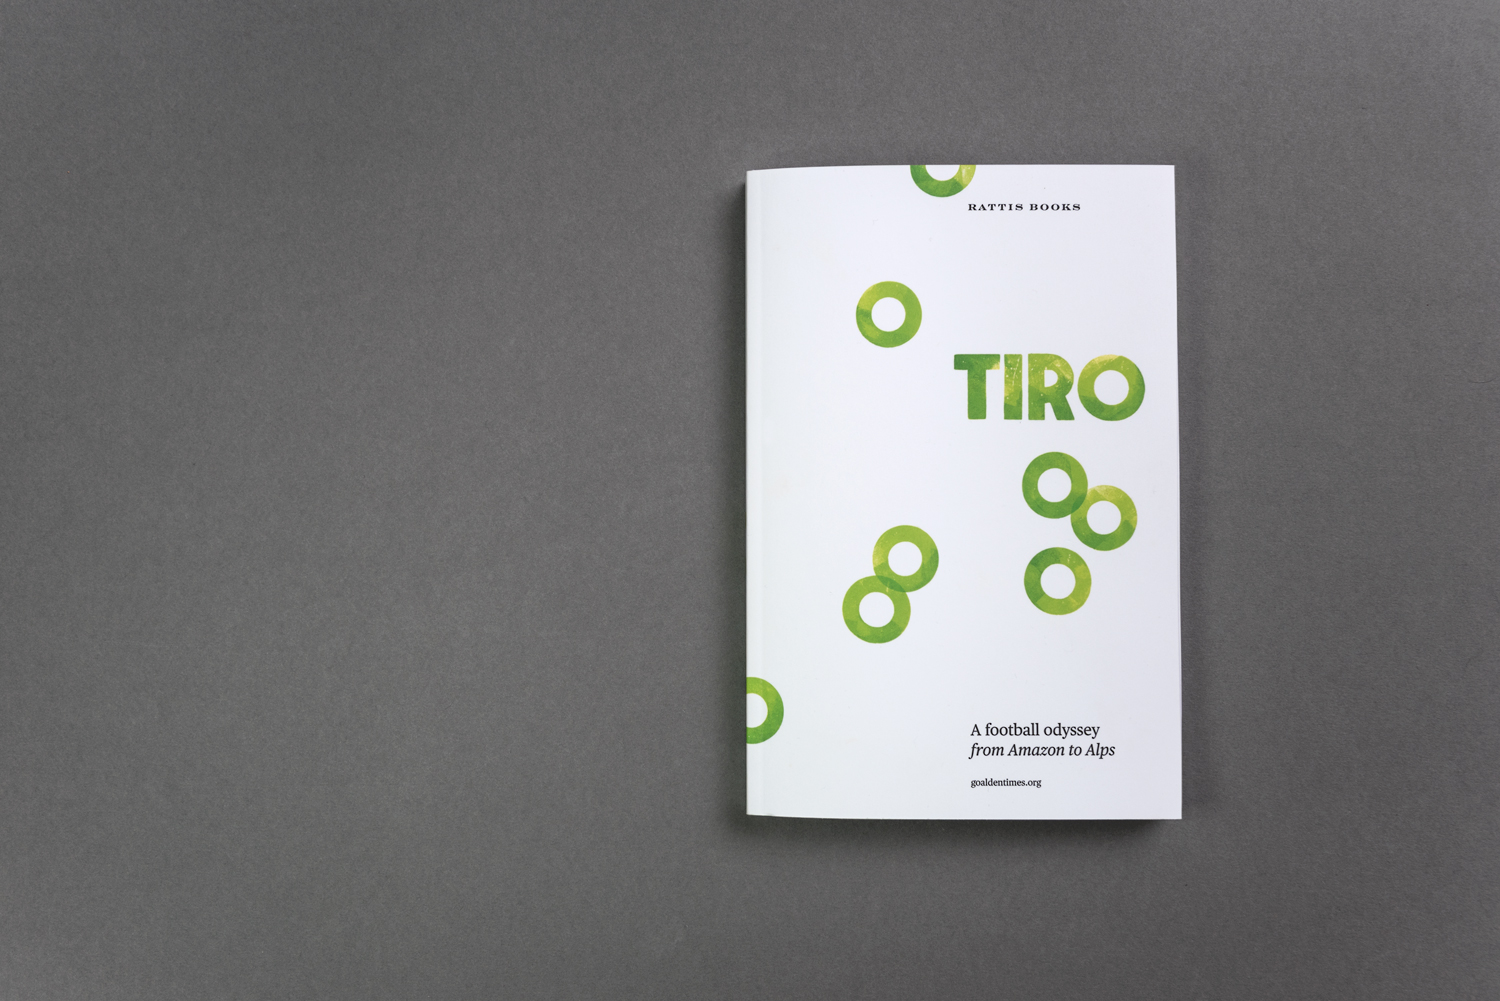 Print by London-based design studio, private press and typography workshop The Counter Press for Tiro, released by UK independent publisher Rattis Books.